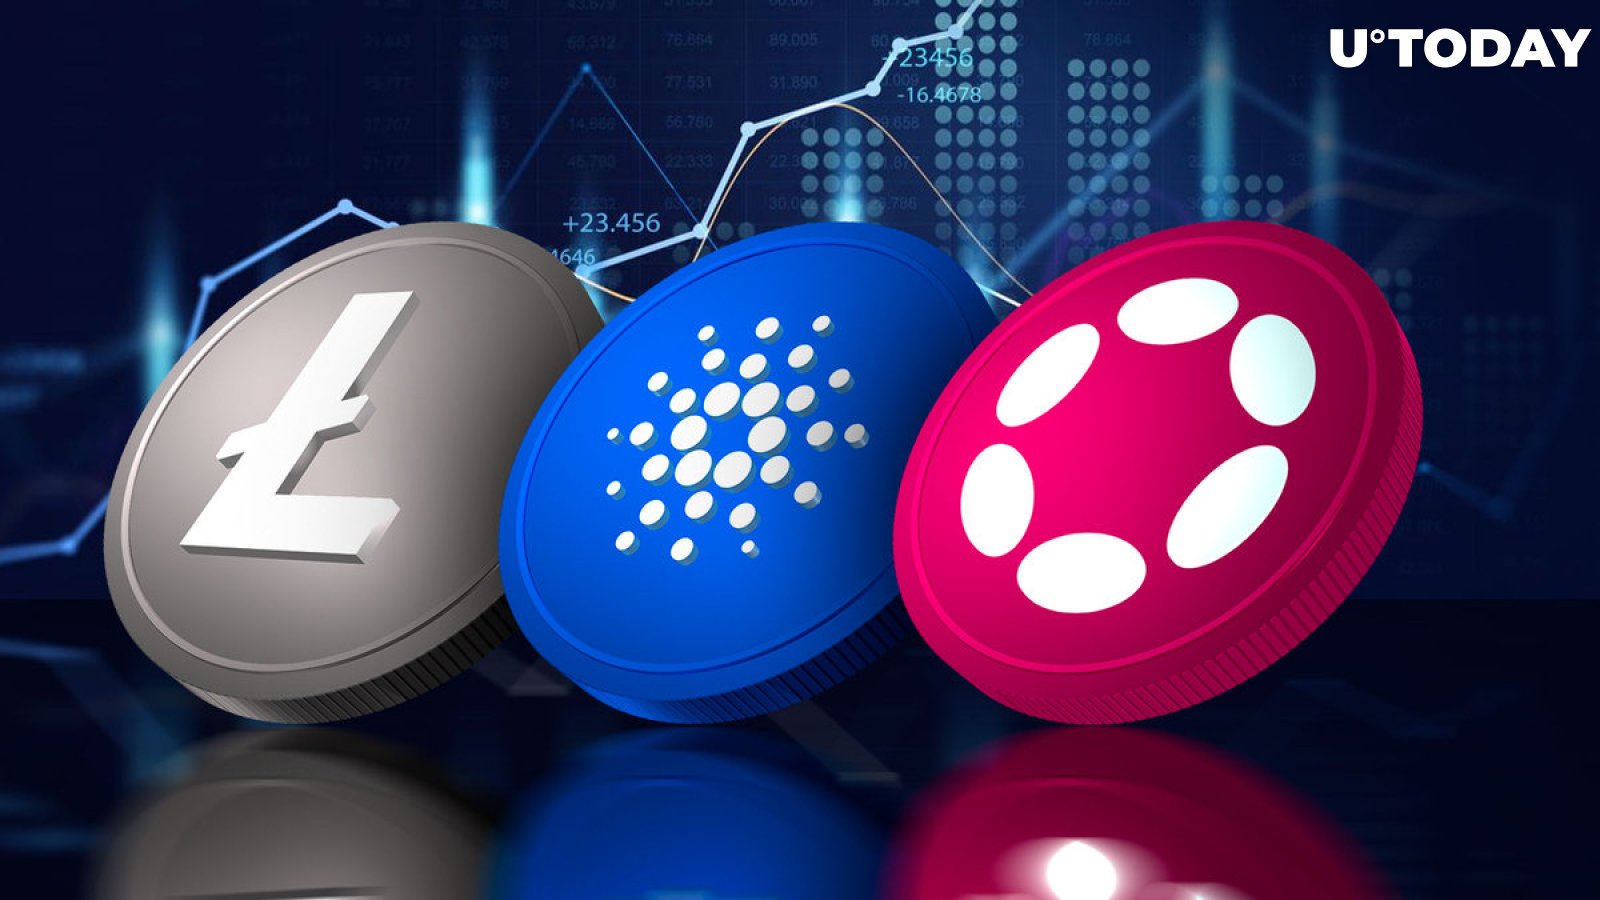 Polkadot, Cardano and Litecoin attract $6.3 million inflows in epic market boom